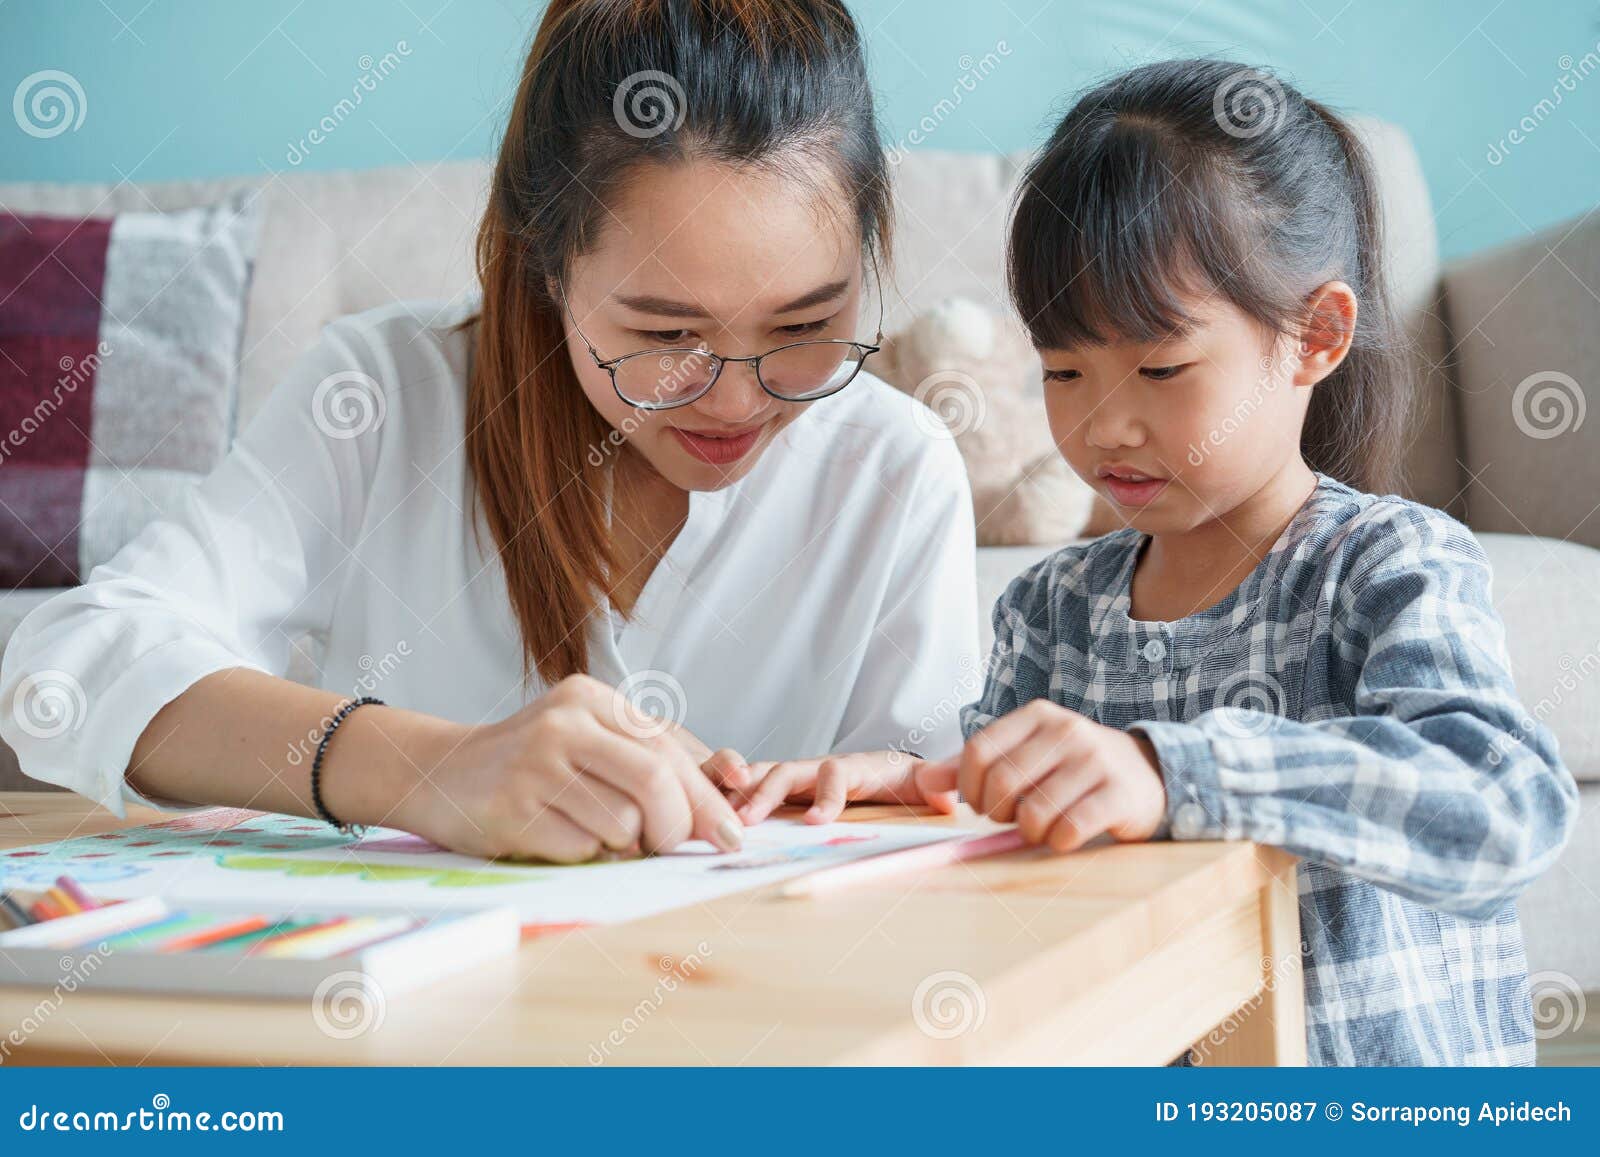 asian family with mother and daughter doing together activities at home. happy mom and child doing learning and drawing on table